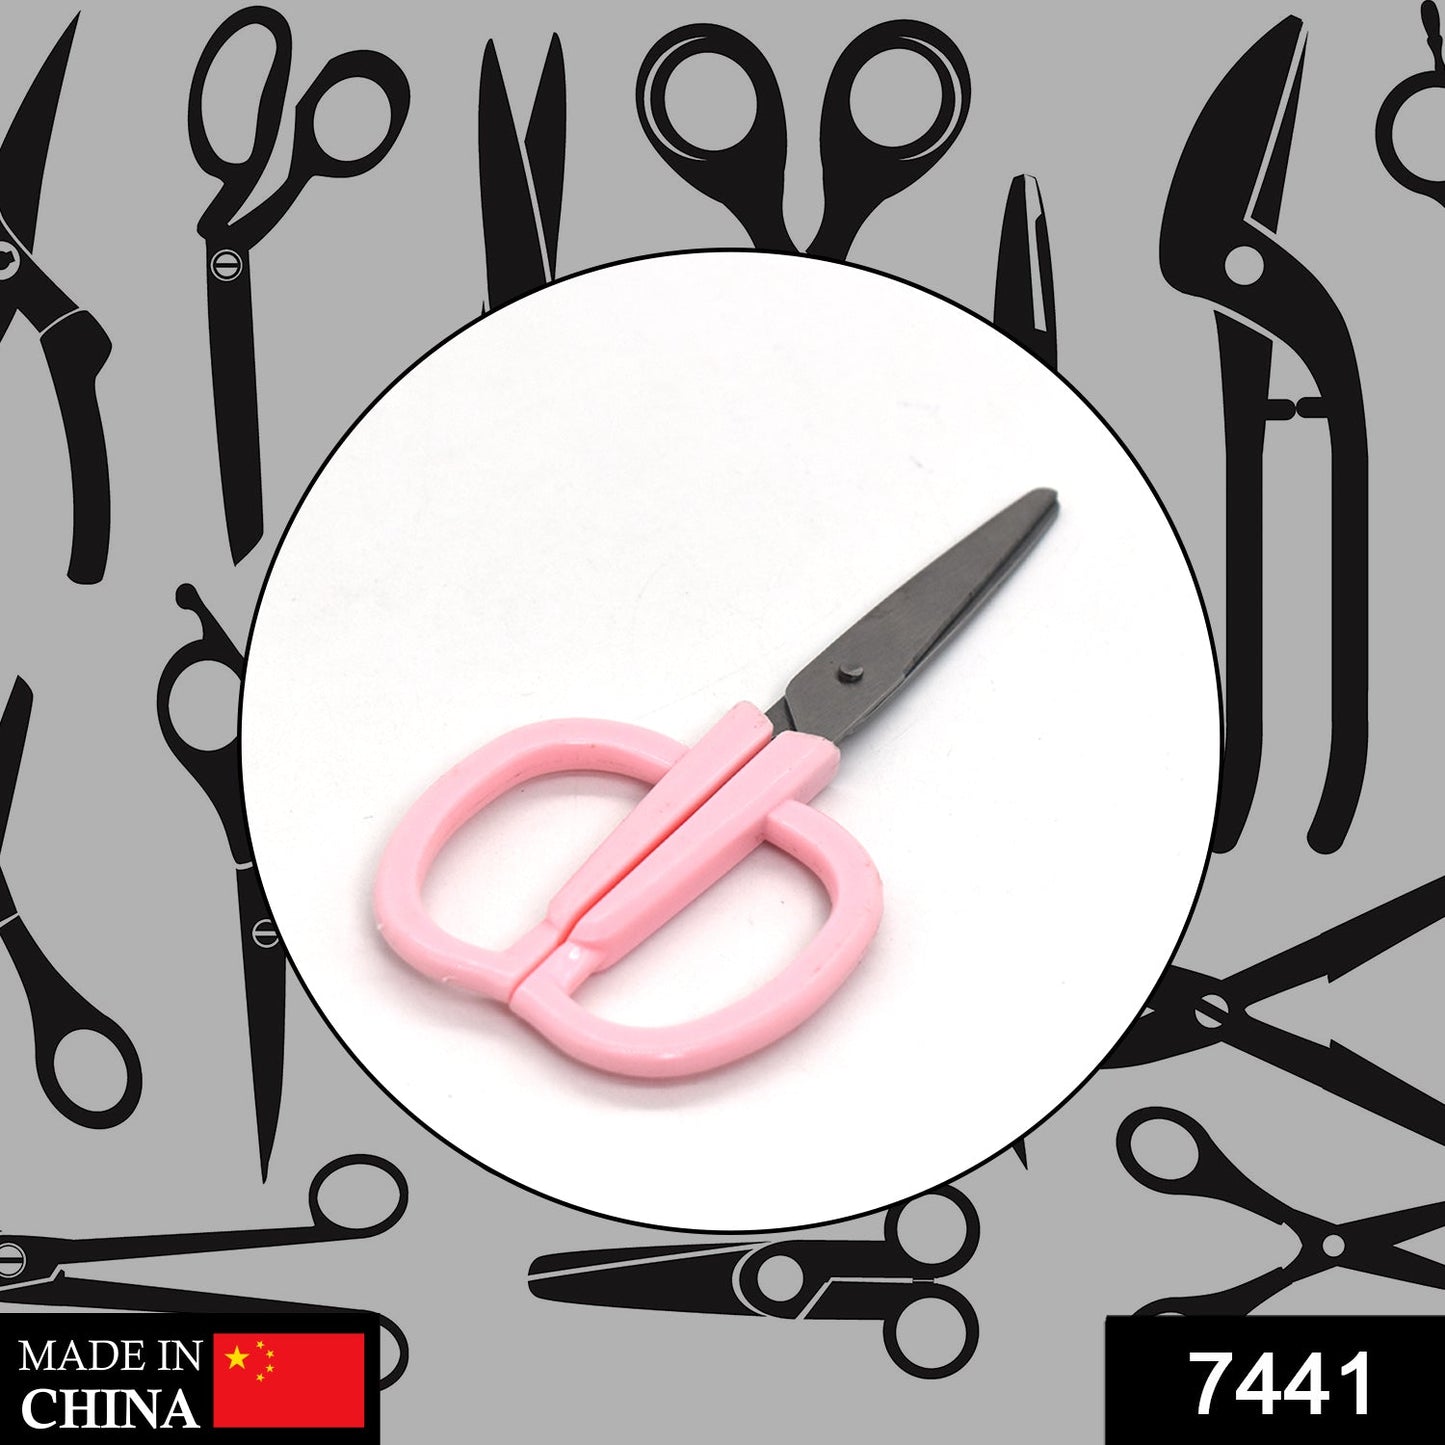 7441 Multipurpose Scissors Comfort Grip Handles Used in Home and Office - SWASTIK CREATIONS The Trend Point SWASTIK CREATIONS The Trend Point